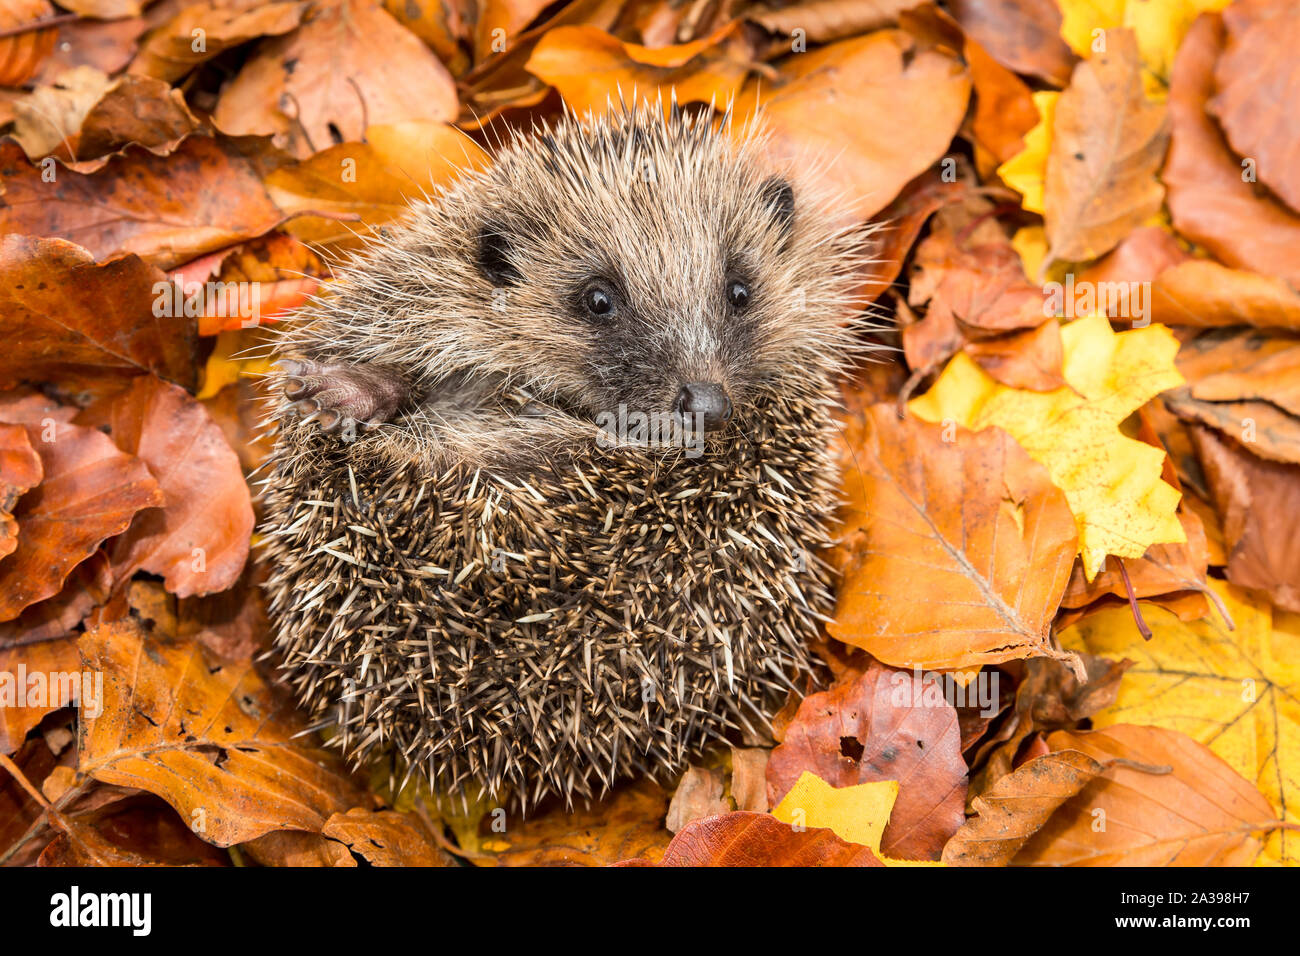 Hedgehog, (Scientific name: Erinaceus europaeus) Native, wild European hedgehog curled into a ball in colourful Autumn or Fall leaves.  Close up.  Hor Stock Photo